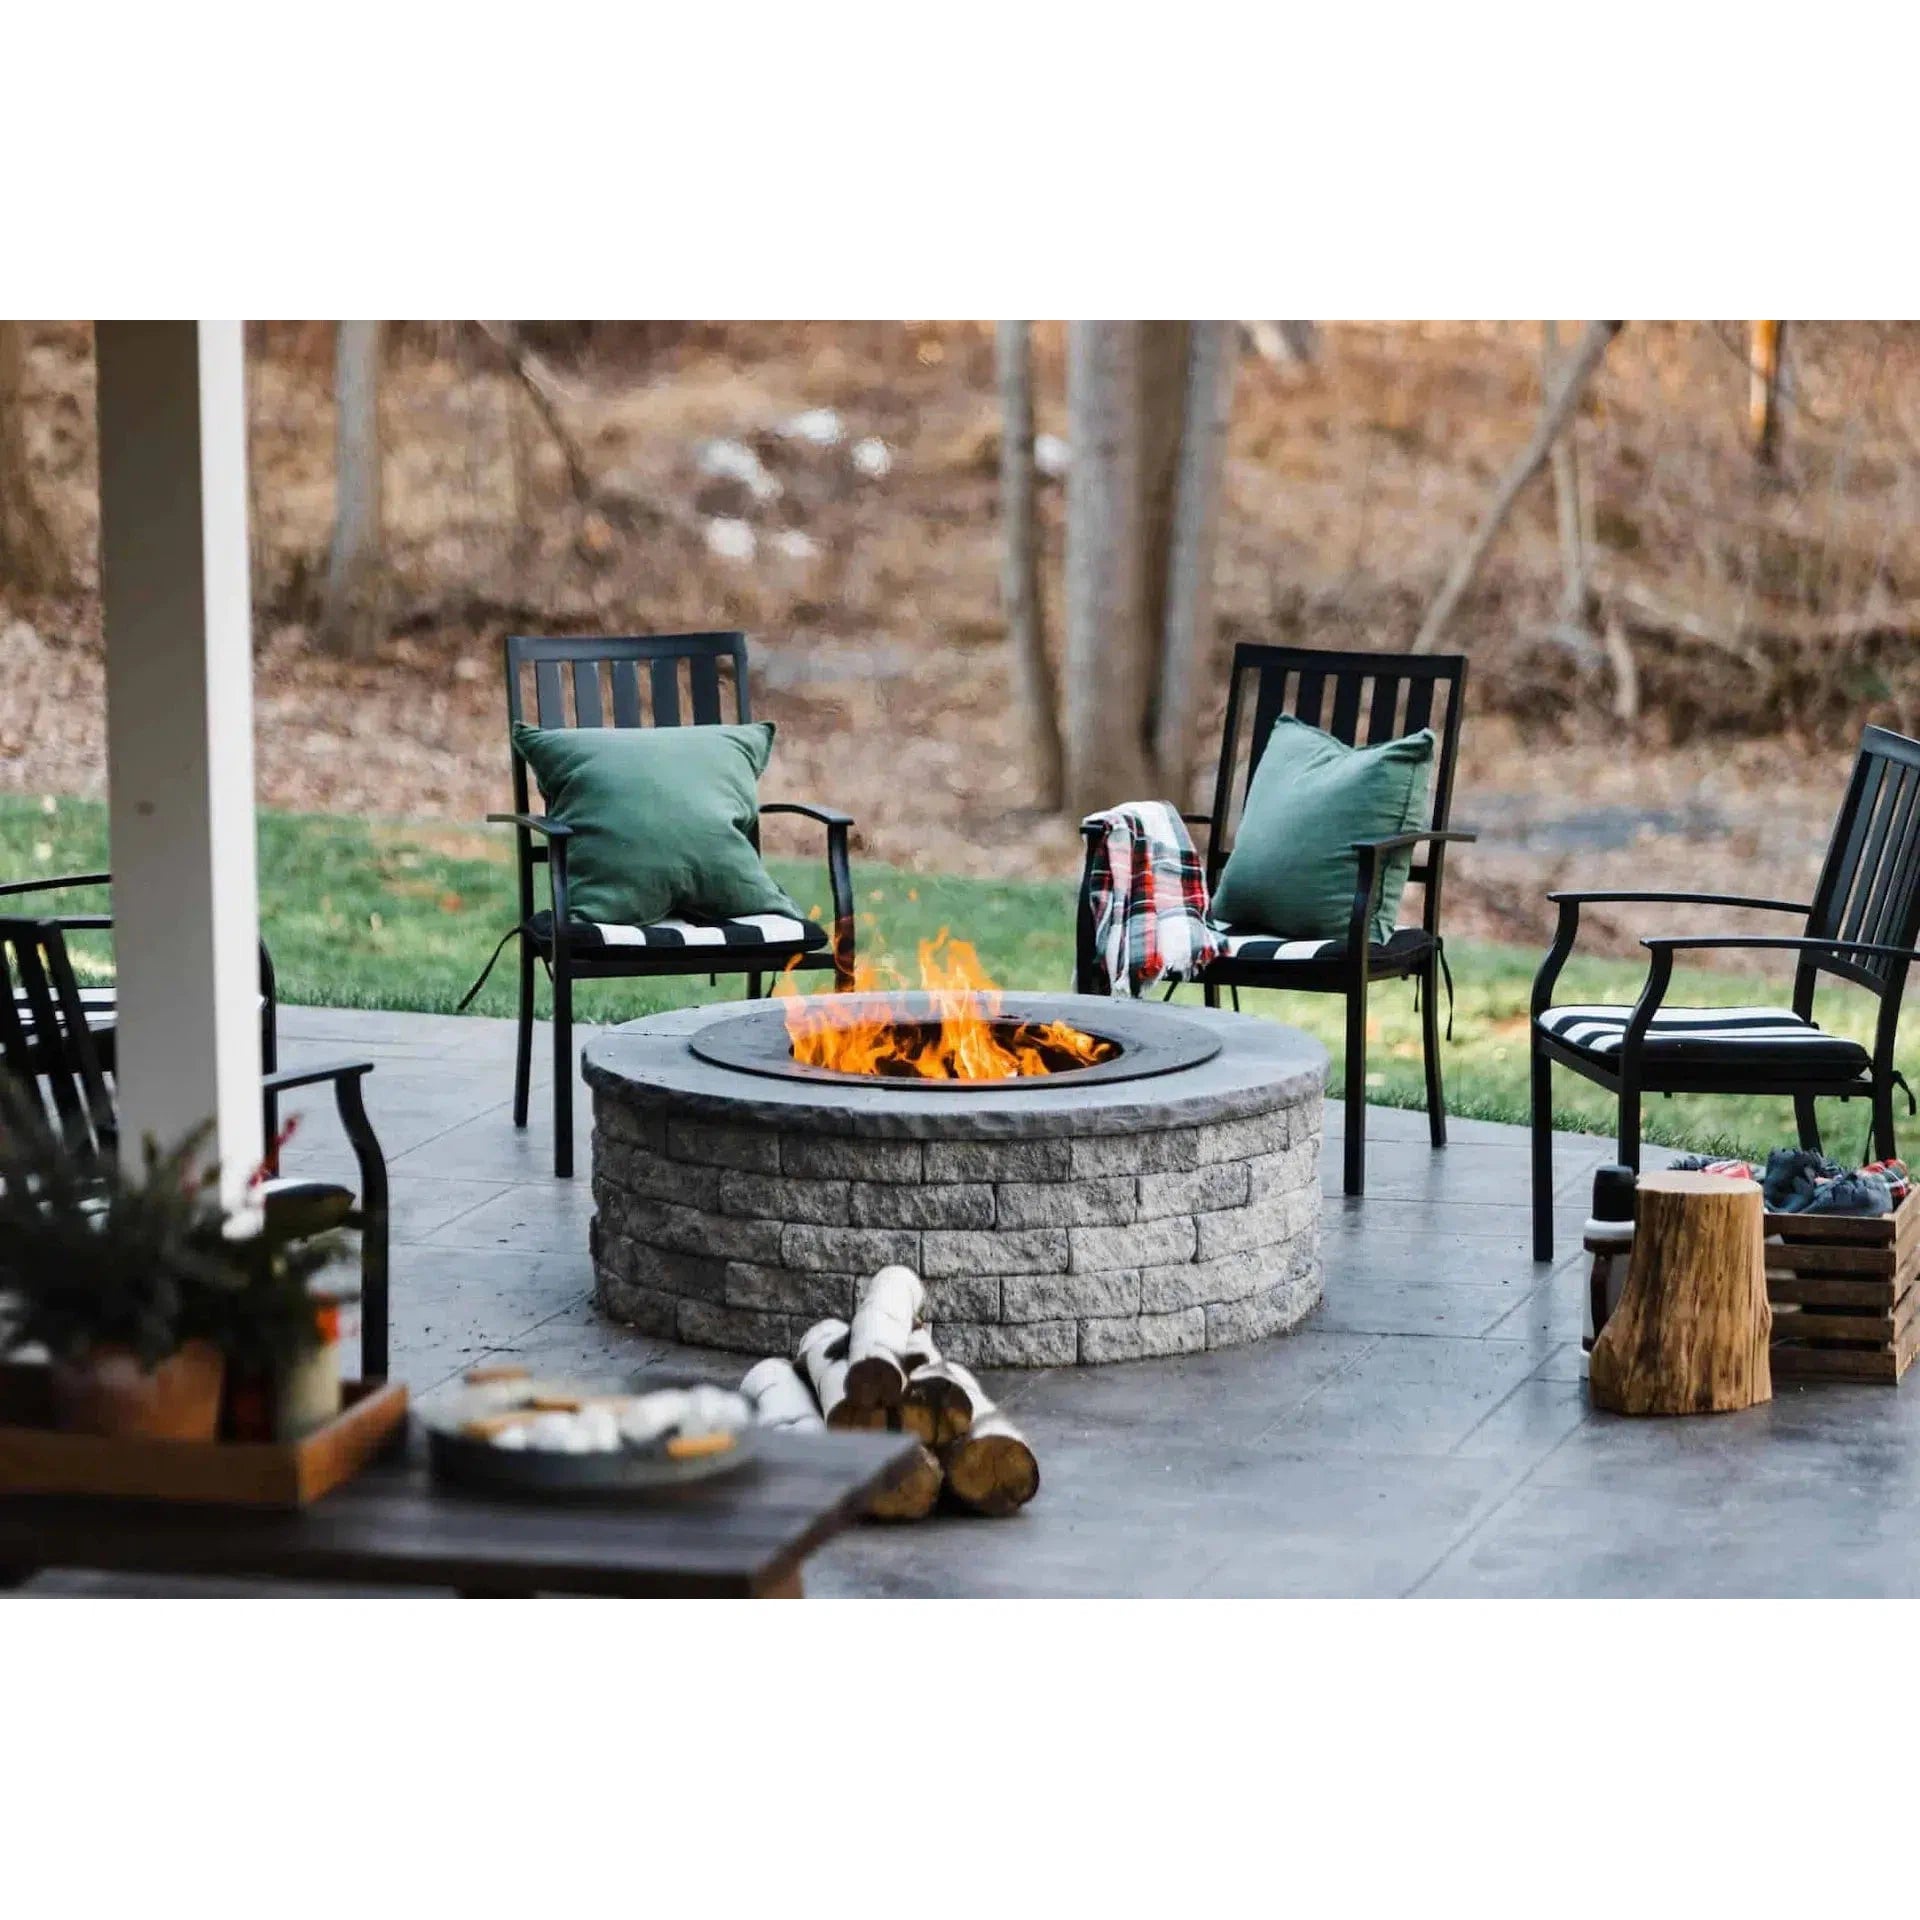 Zentro 24" Round Stainless Steel Smokeless Fire Pit Insert with Lid